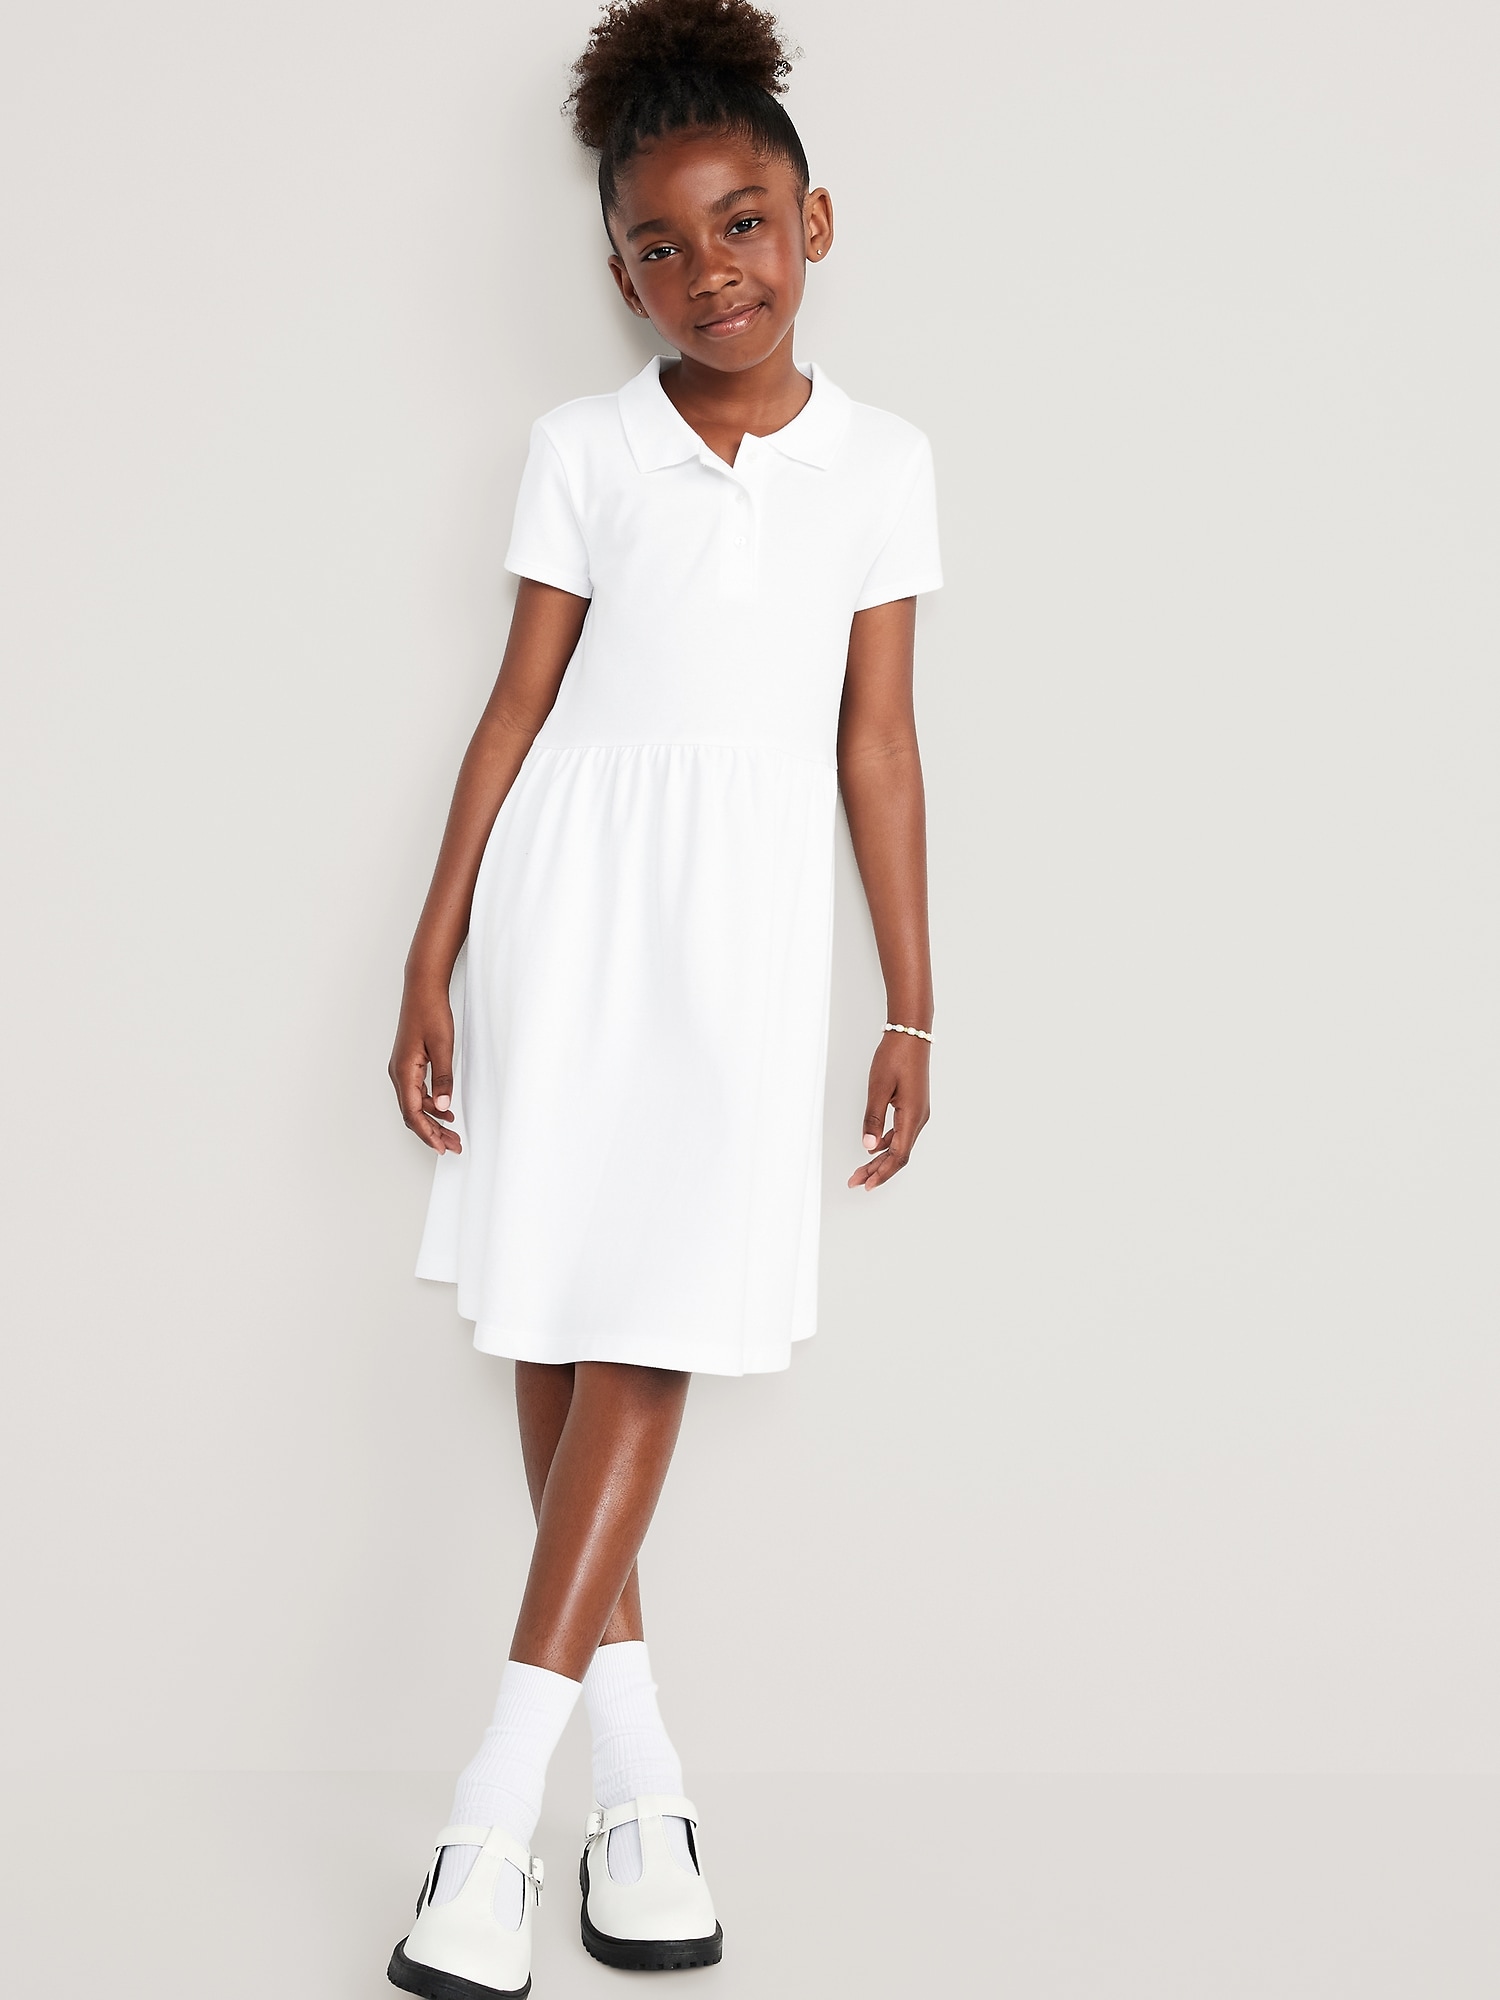 Old Navy School Uniform Fit & Flare Pique Polo Dress for Girls white. 1